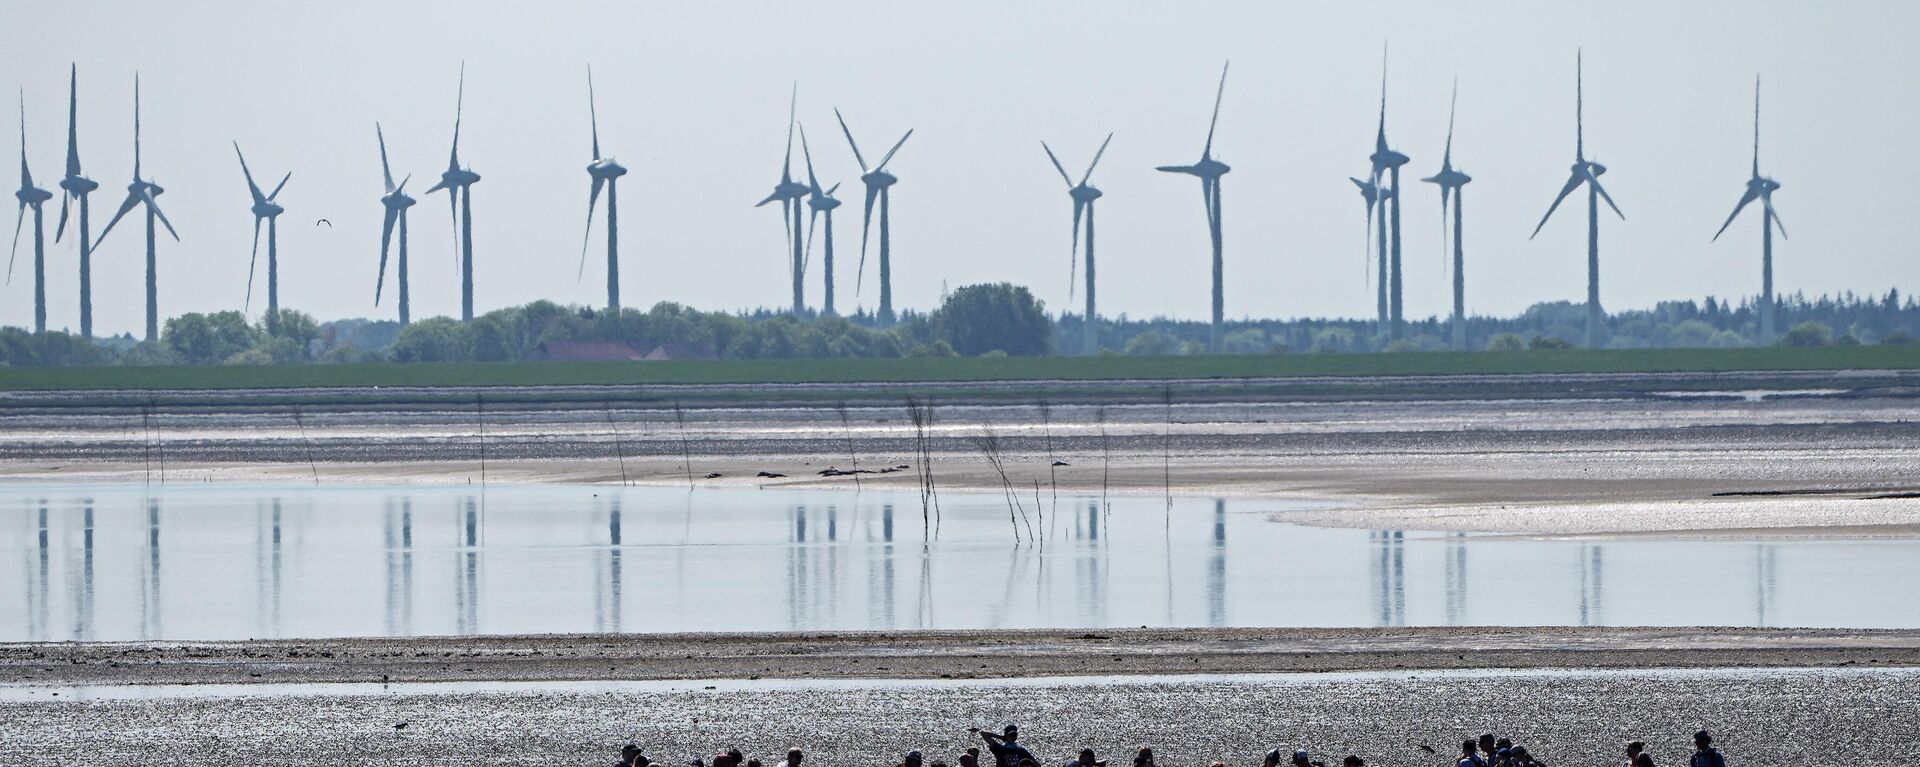 In this June 1, 2021 file photo, people explore the wadden sea at the island Norderney, Germany, in front of wind turbines, producing renewable energy. - Sputnik International, 1920, 02.05.2022